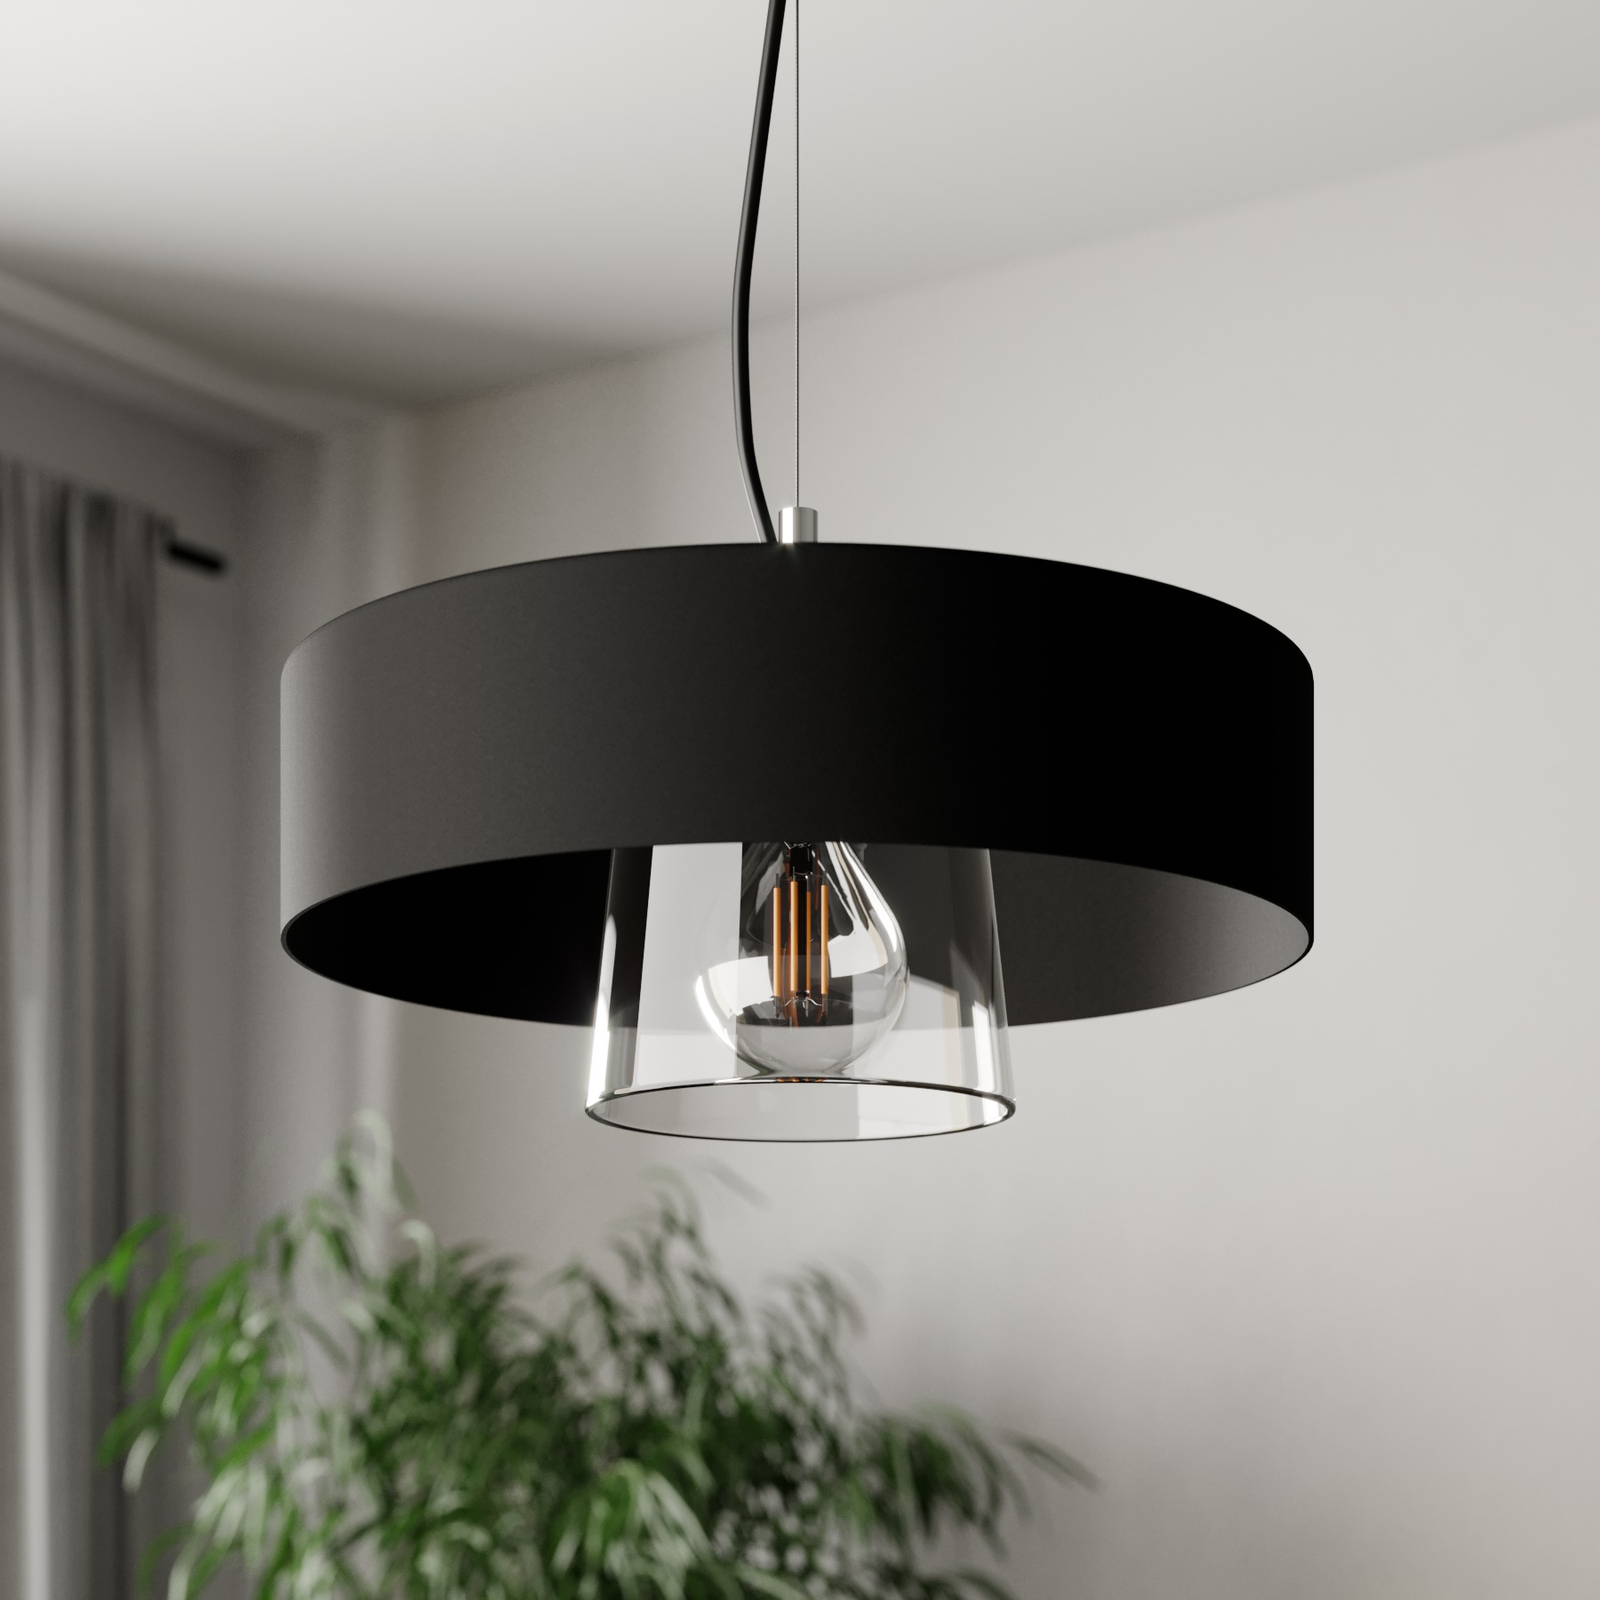 Babilon hanging light with double lampshade